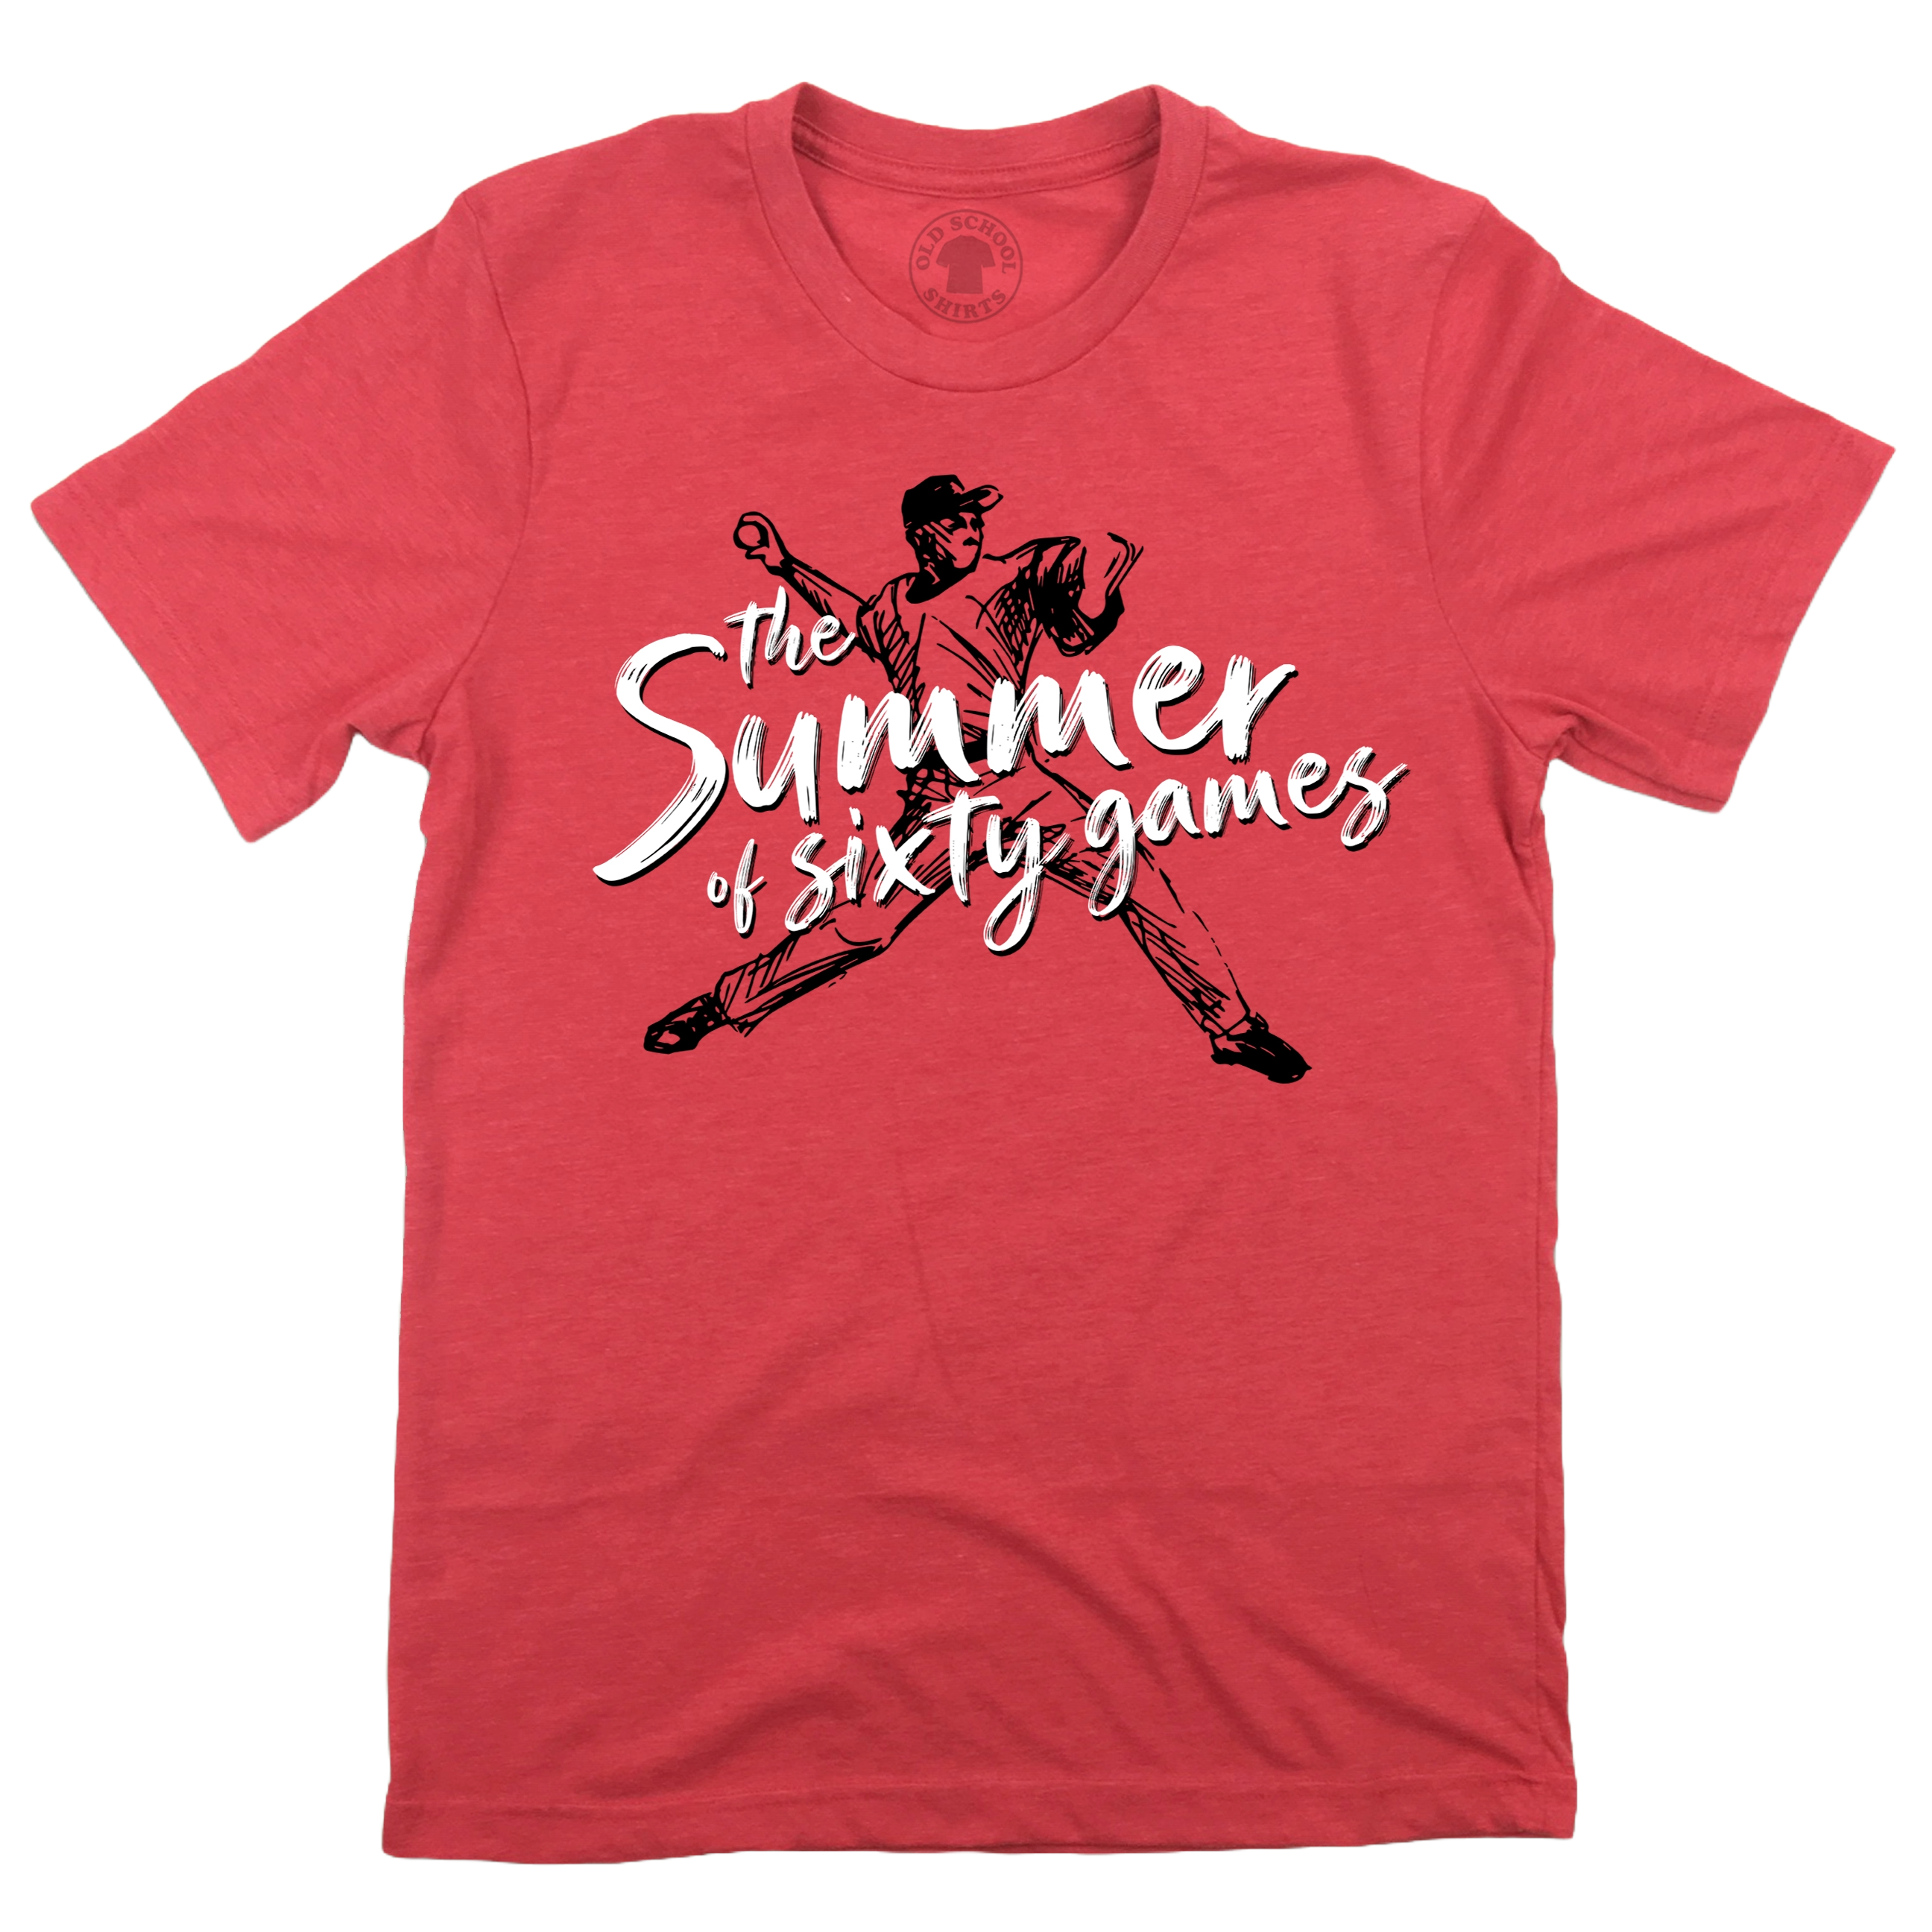 The Summer 60 Games - Red Tee